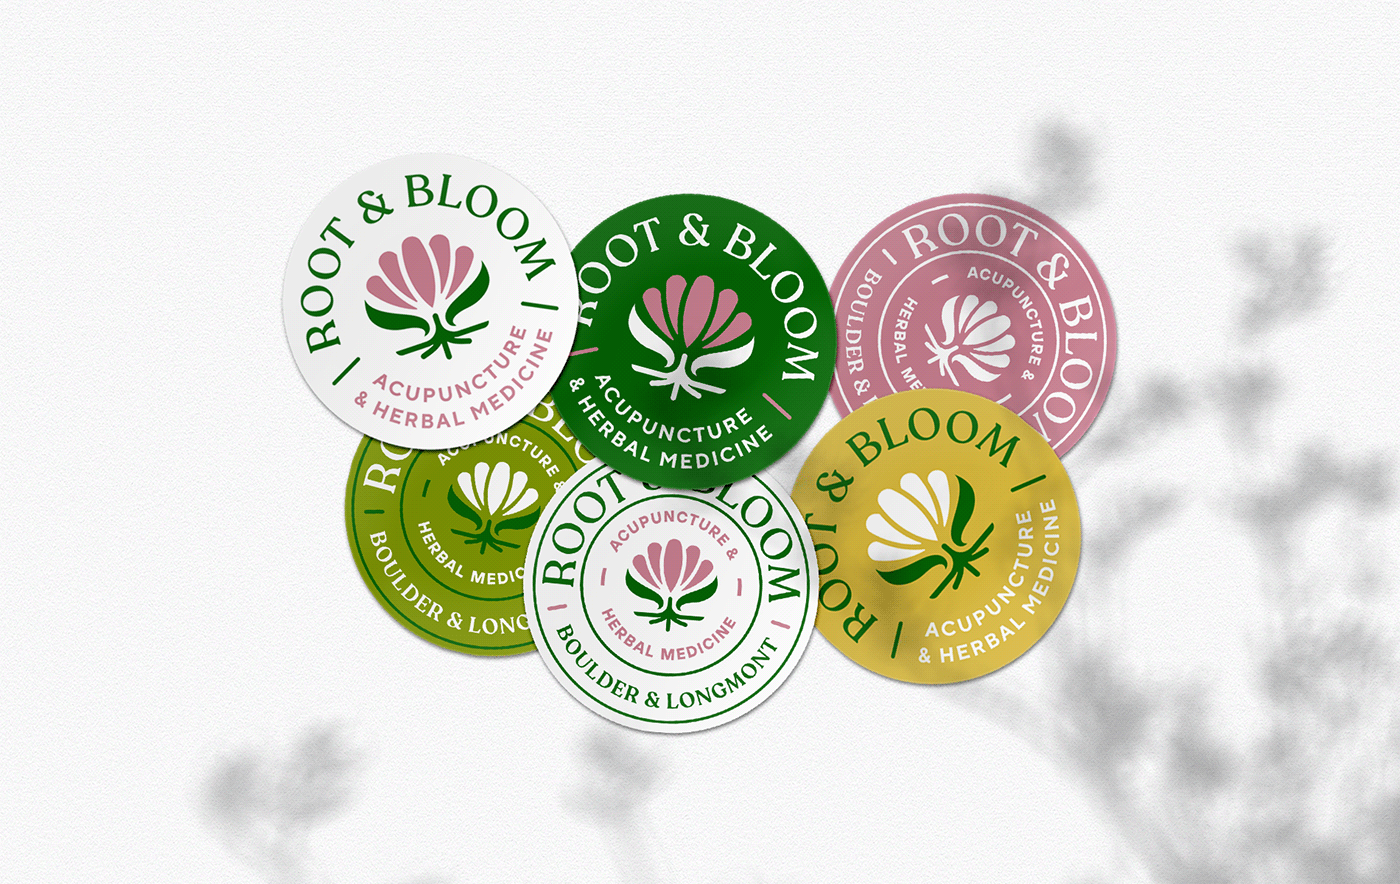 Root & Bloom sticker and badges